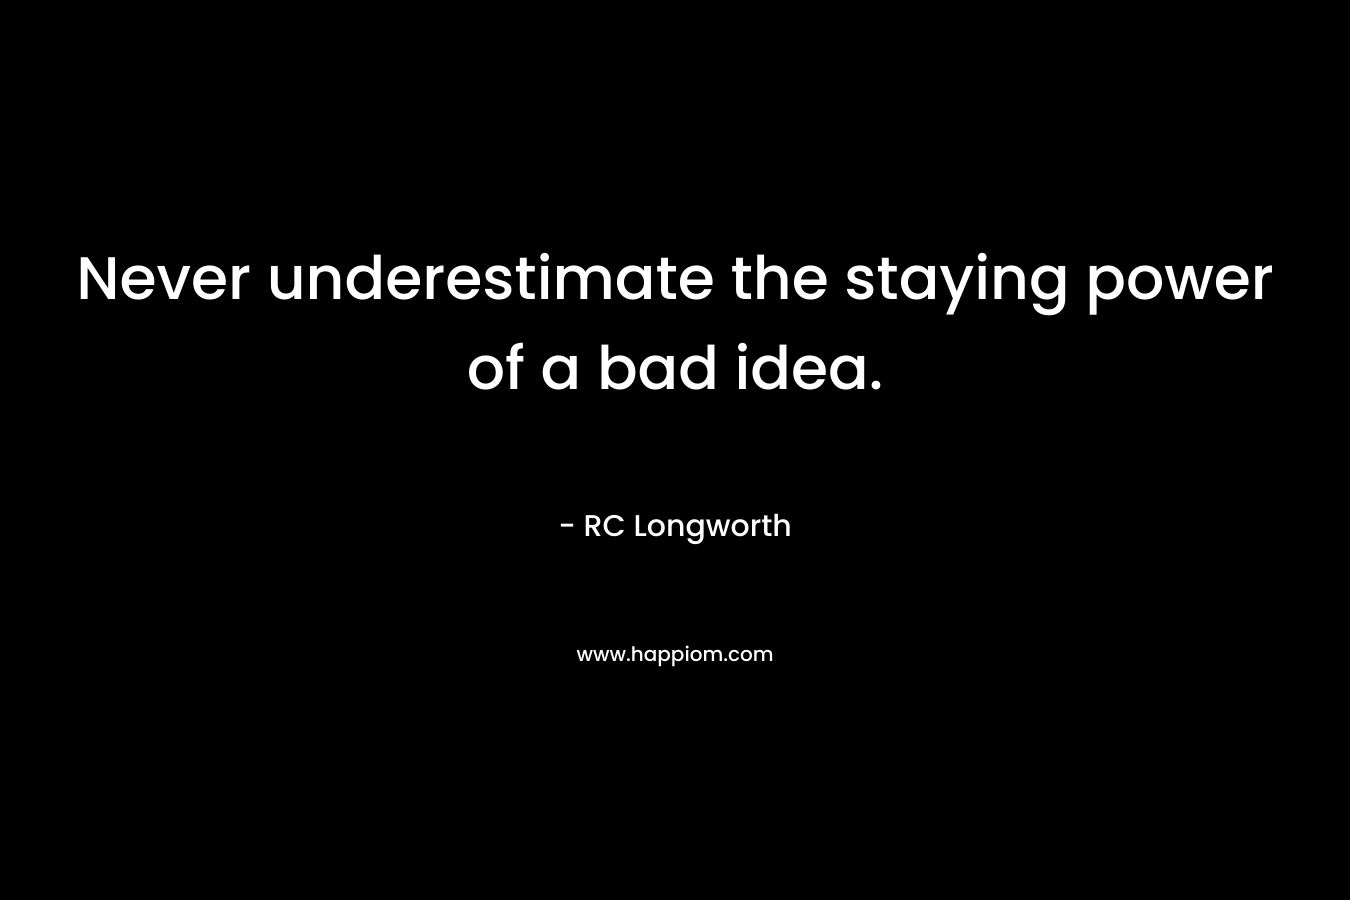 Never underestimate the staying power of a bad idea.